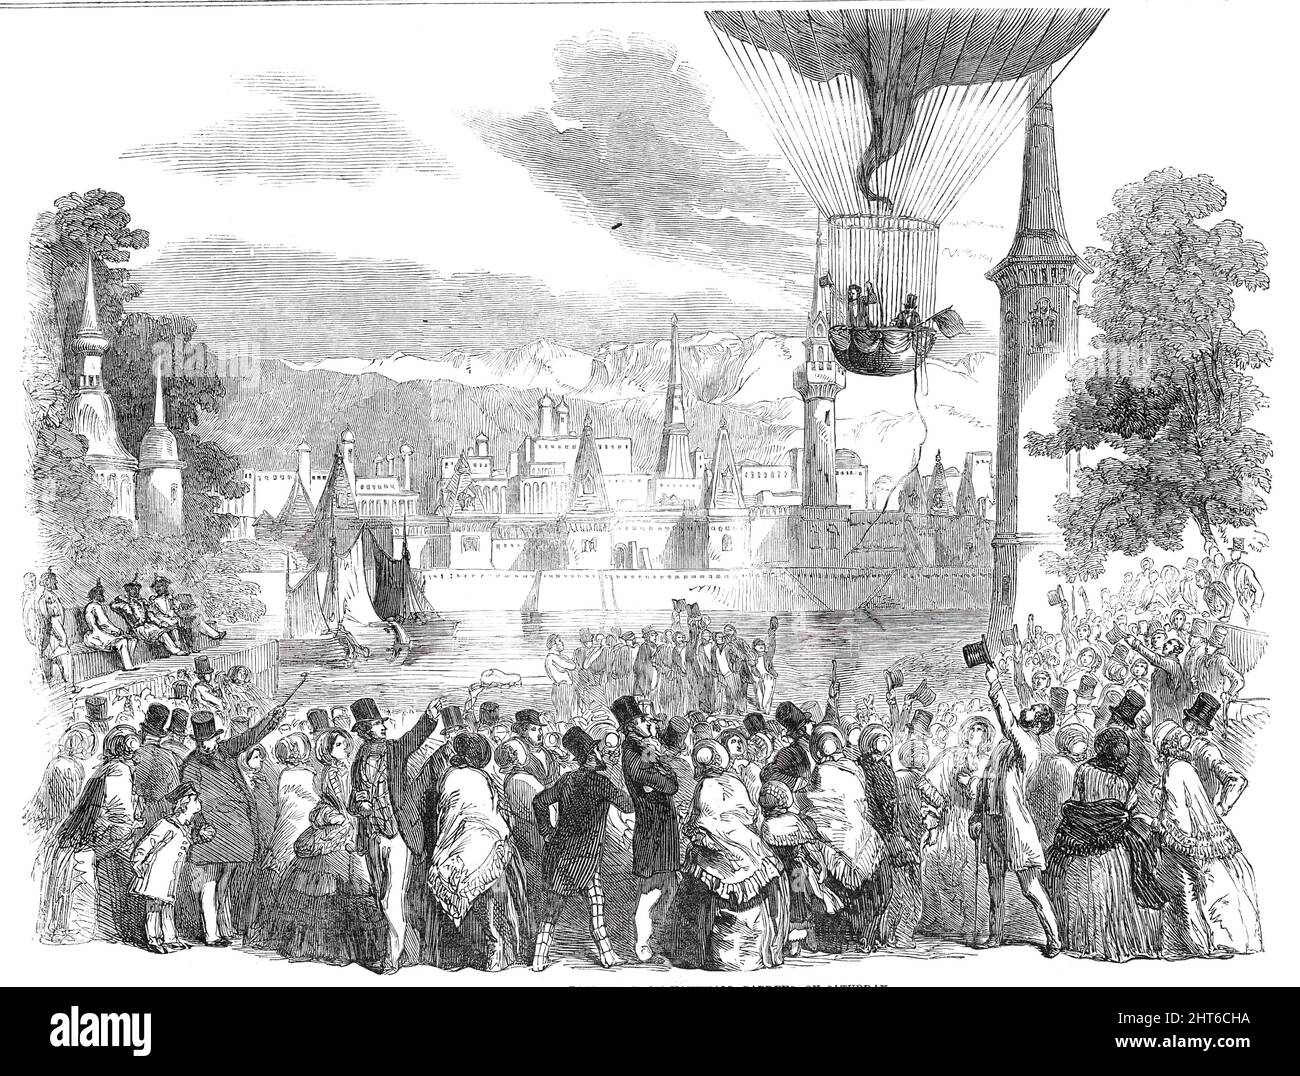 Ascent of the Nassau Balloon, from Vauxhall Gardens, [London], on Saturday, 1850. 'A grand fete was given at these Gardens on Saturday, when the most attractive scene was the ascent of the Nassau Balloon, with Mr. [Charles] Green and Mr. [George] Rush. Three of the members of the Nepaulese Embassy were present, to whom the balloon, when inflated, was an object of great interest, as was also the ascent. They examined the balloon with great minuteness, and its construction evidently excited their wonder and admiration. As it ascended they stood gazing at it with marked curiosity and attention, a Stock Photo